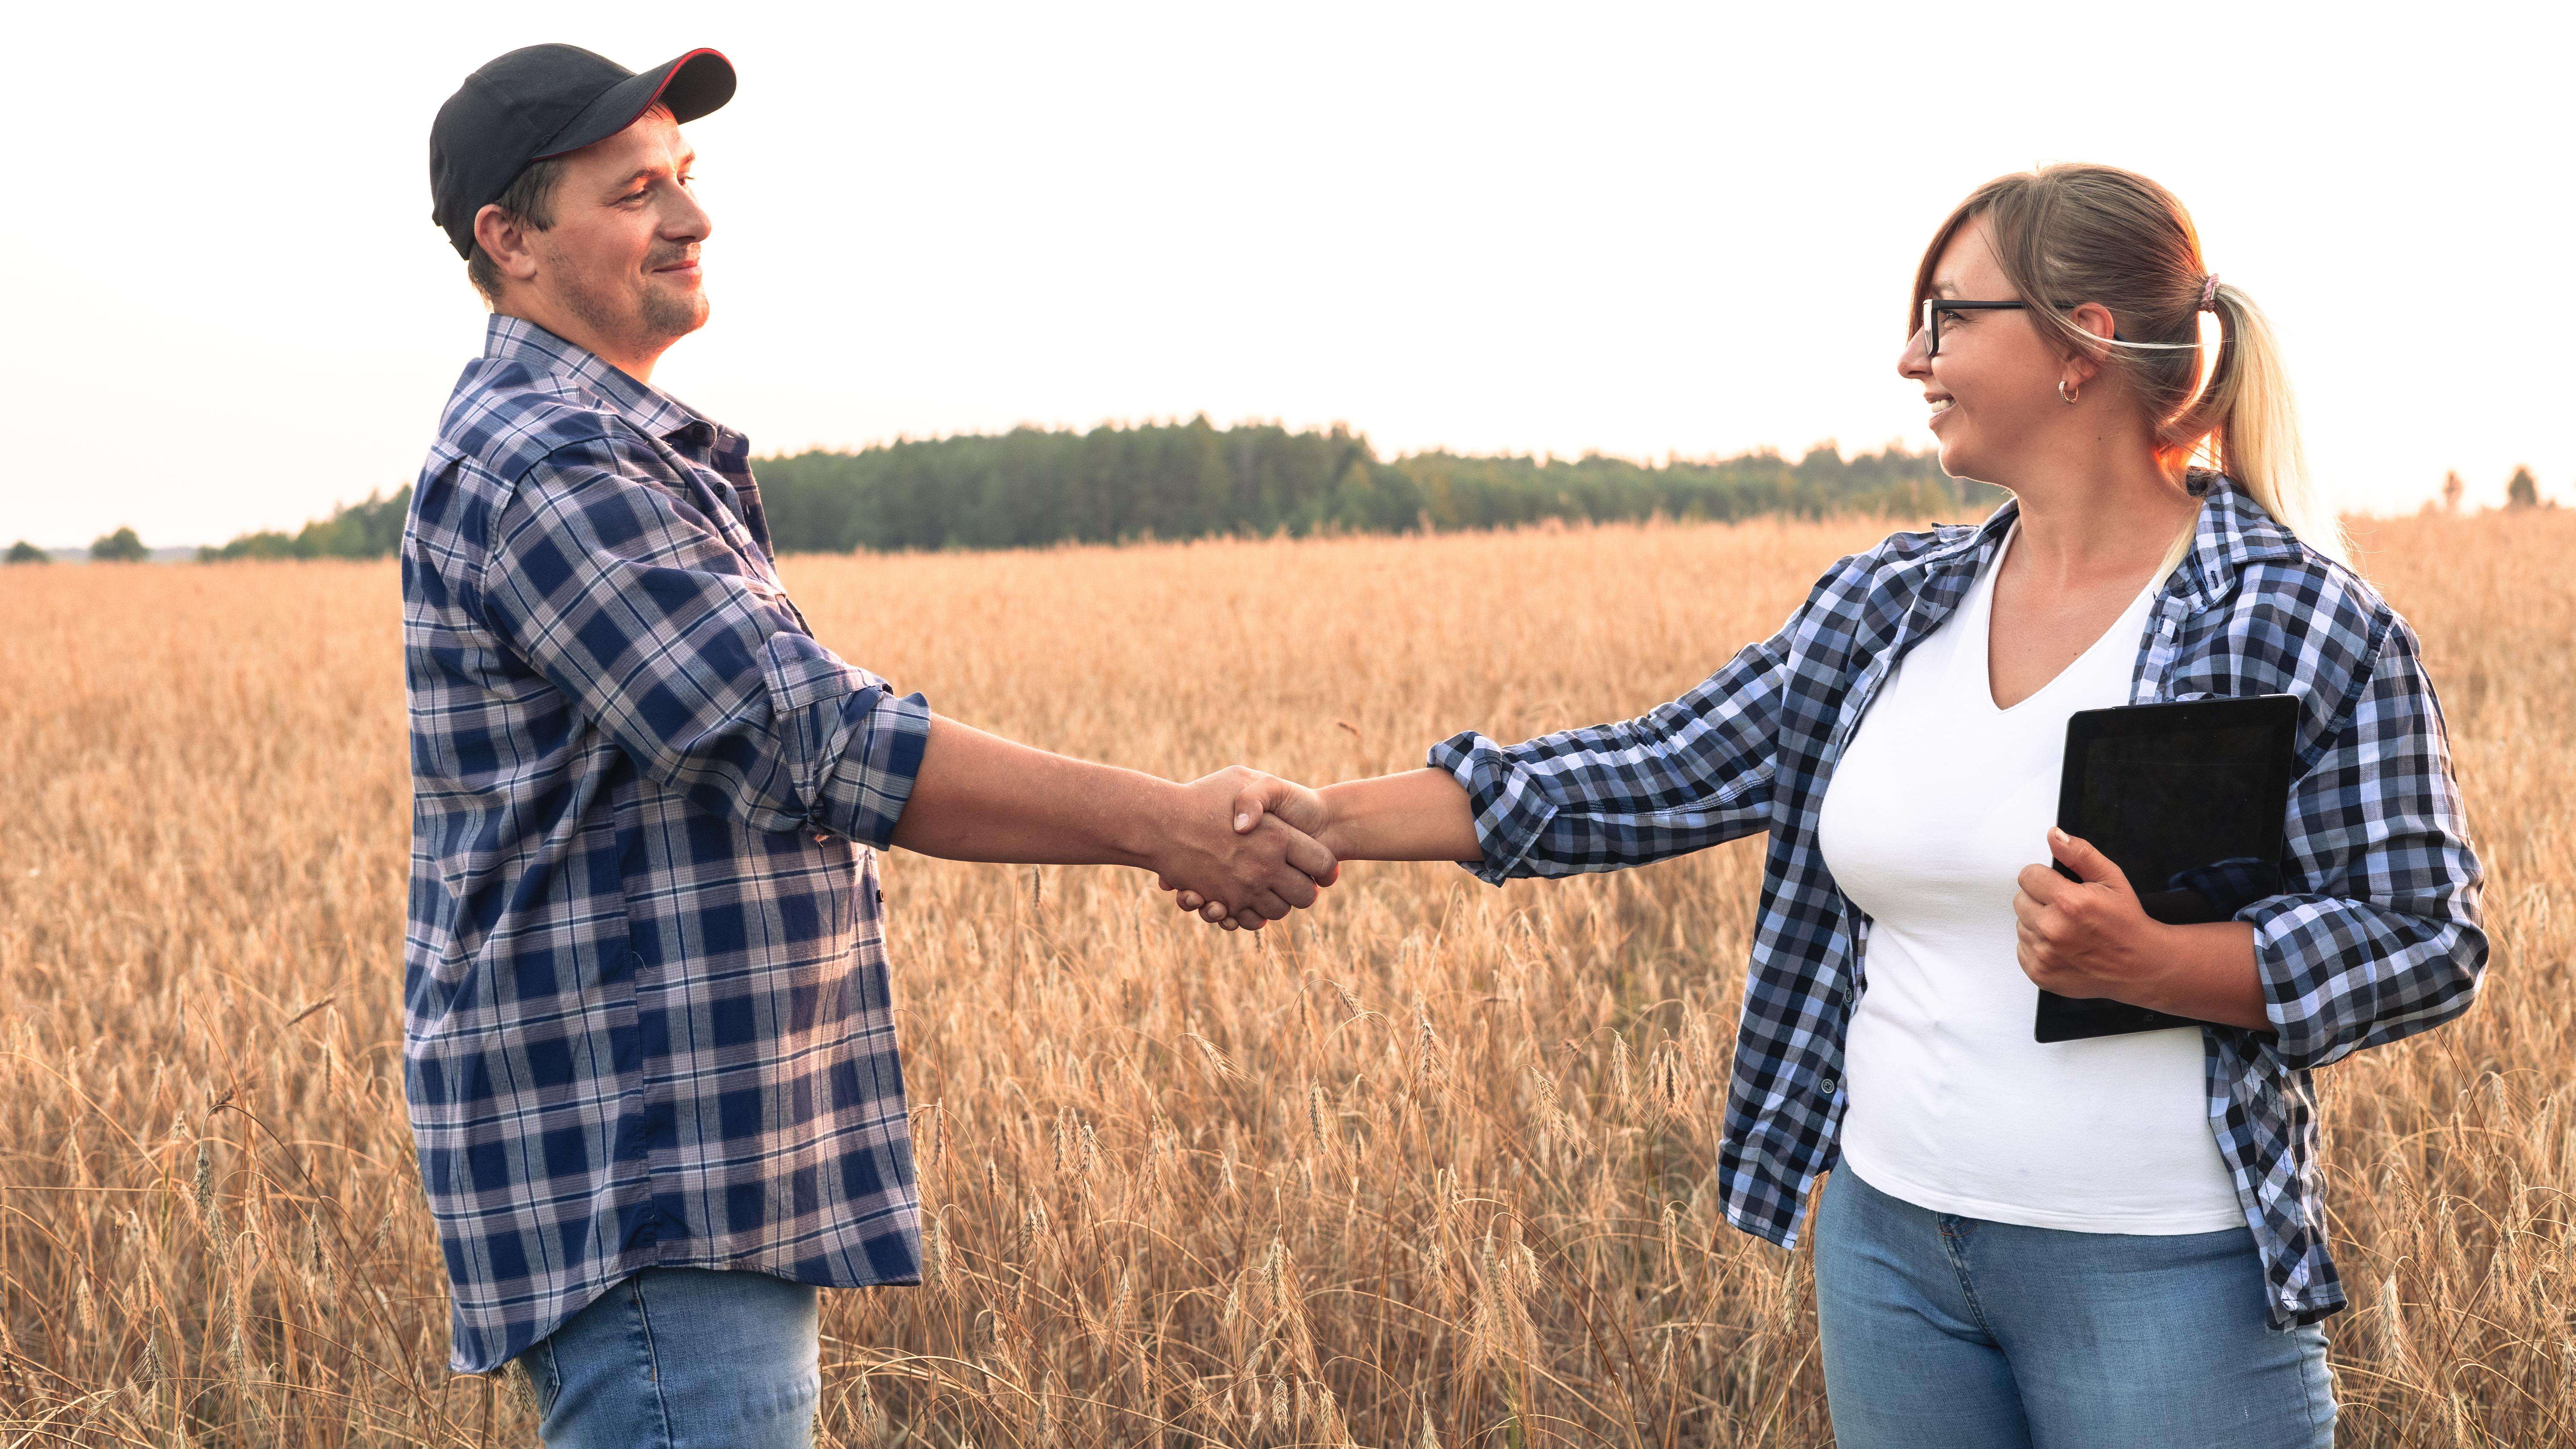 Two people shake hands while standing in a wheat field at sunset